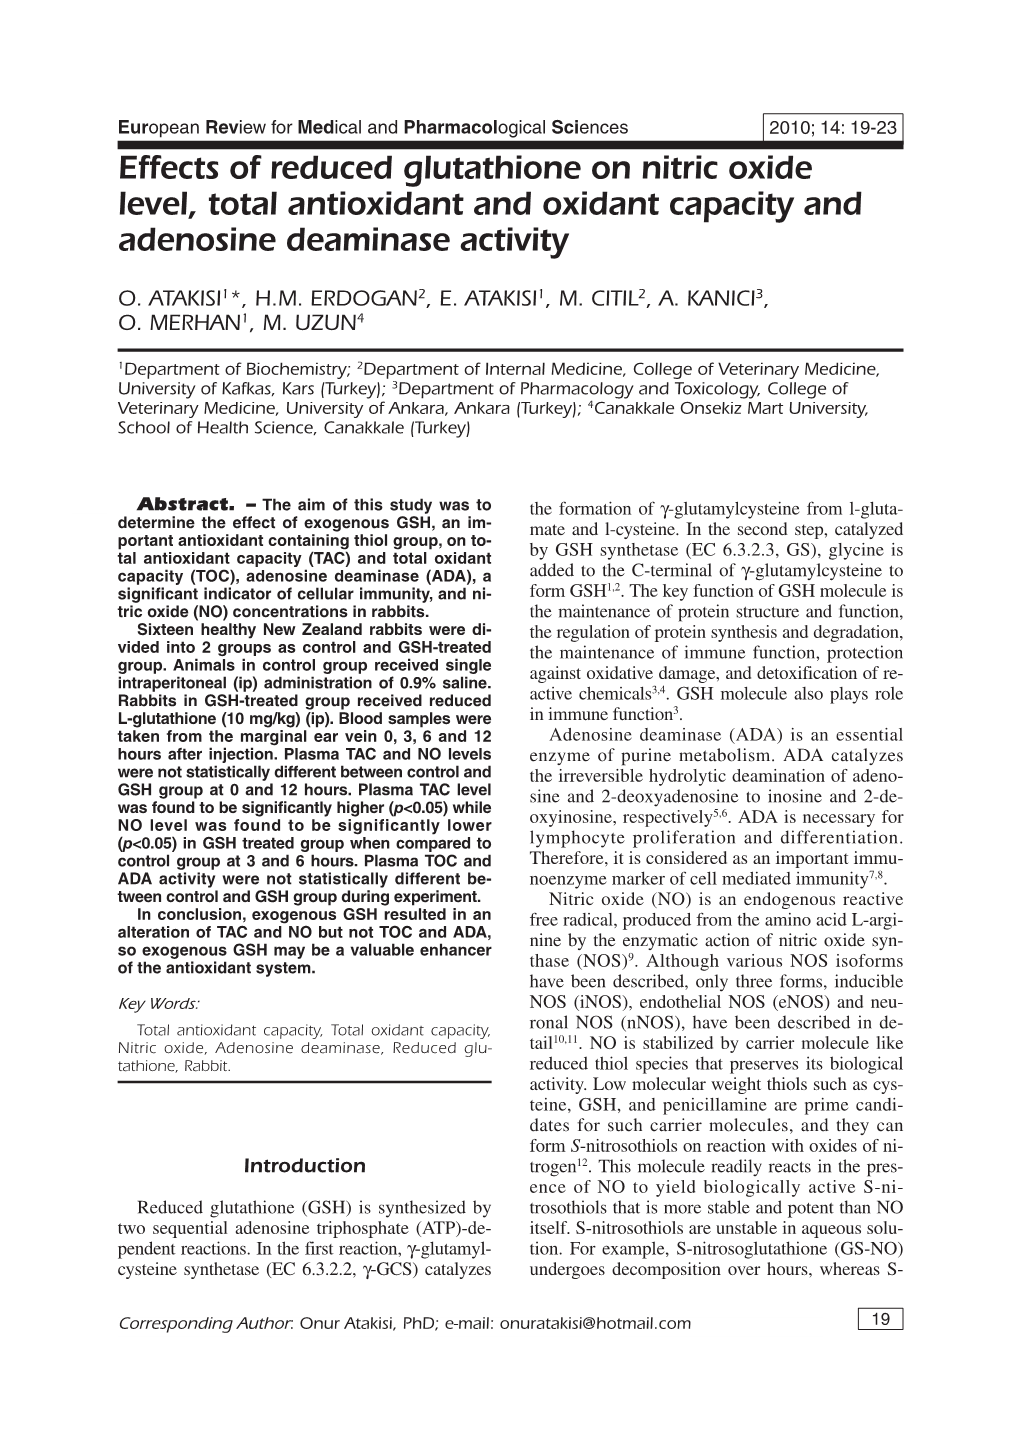 Effects of Reduced Glutathione on Nitric Oxide Level, Total Antioxidant and Oxidant Capacity and Adenosine Deaminase Activity